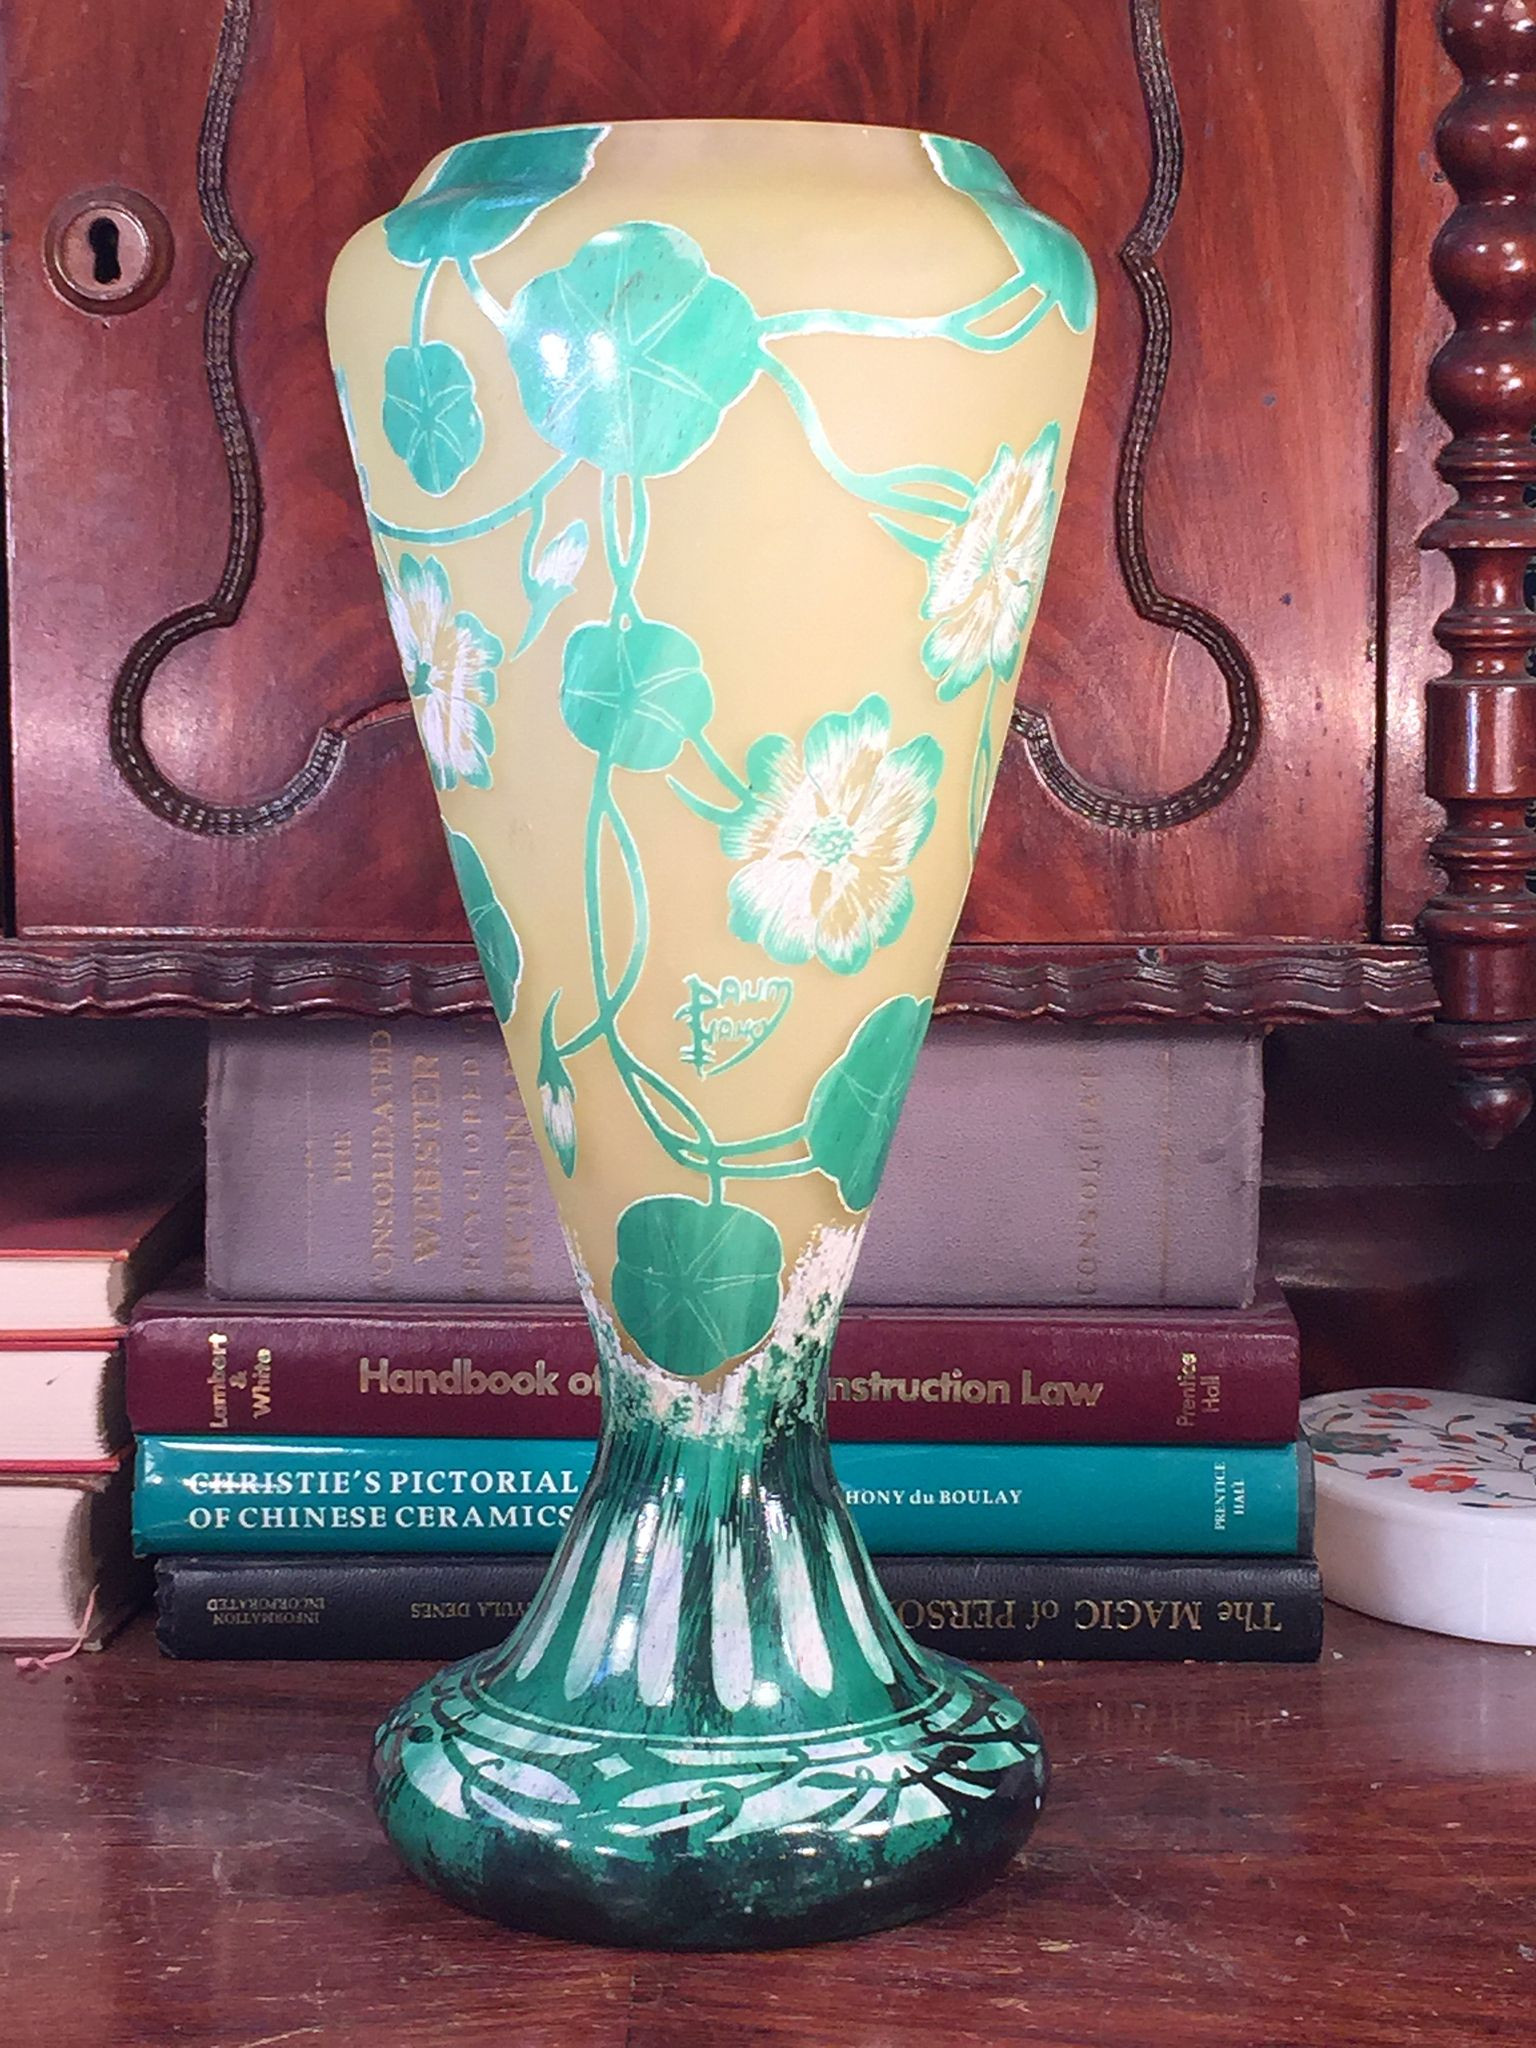 daum glass vase of lovely art nouveau style glass cameo mould blown european handcraft with lovely art nouveau style glass cameo mould blown european handcraft vase with yellow ground color and green and white foliage design signed daum nancy